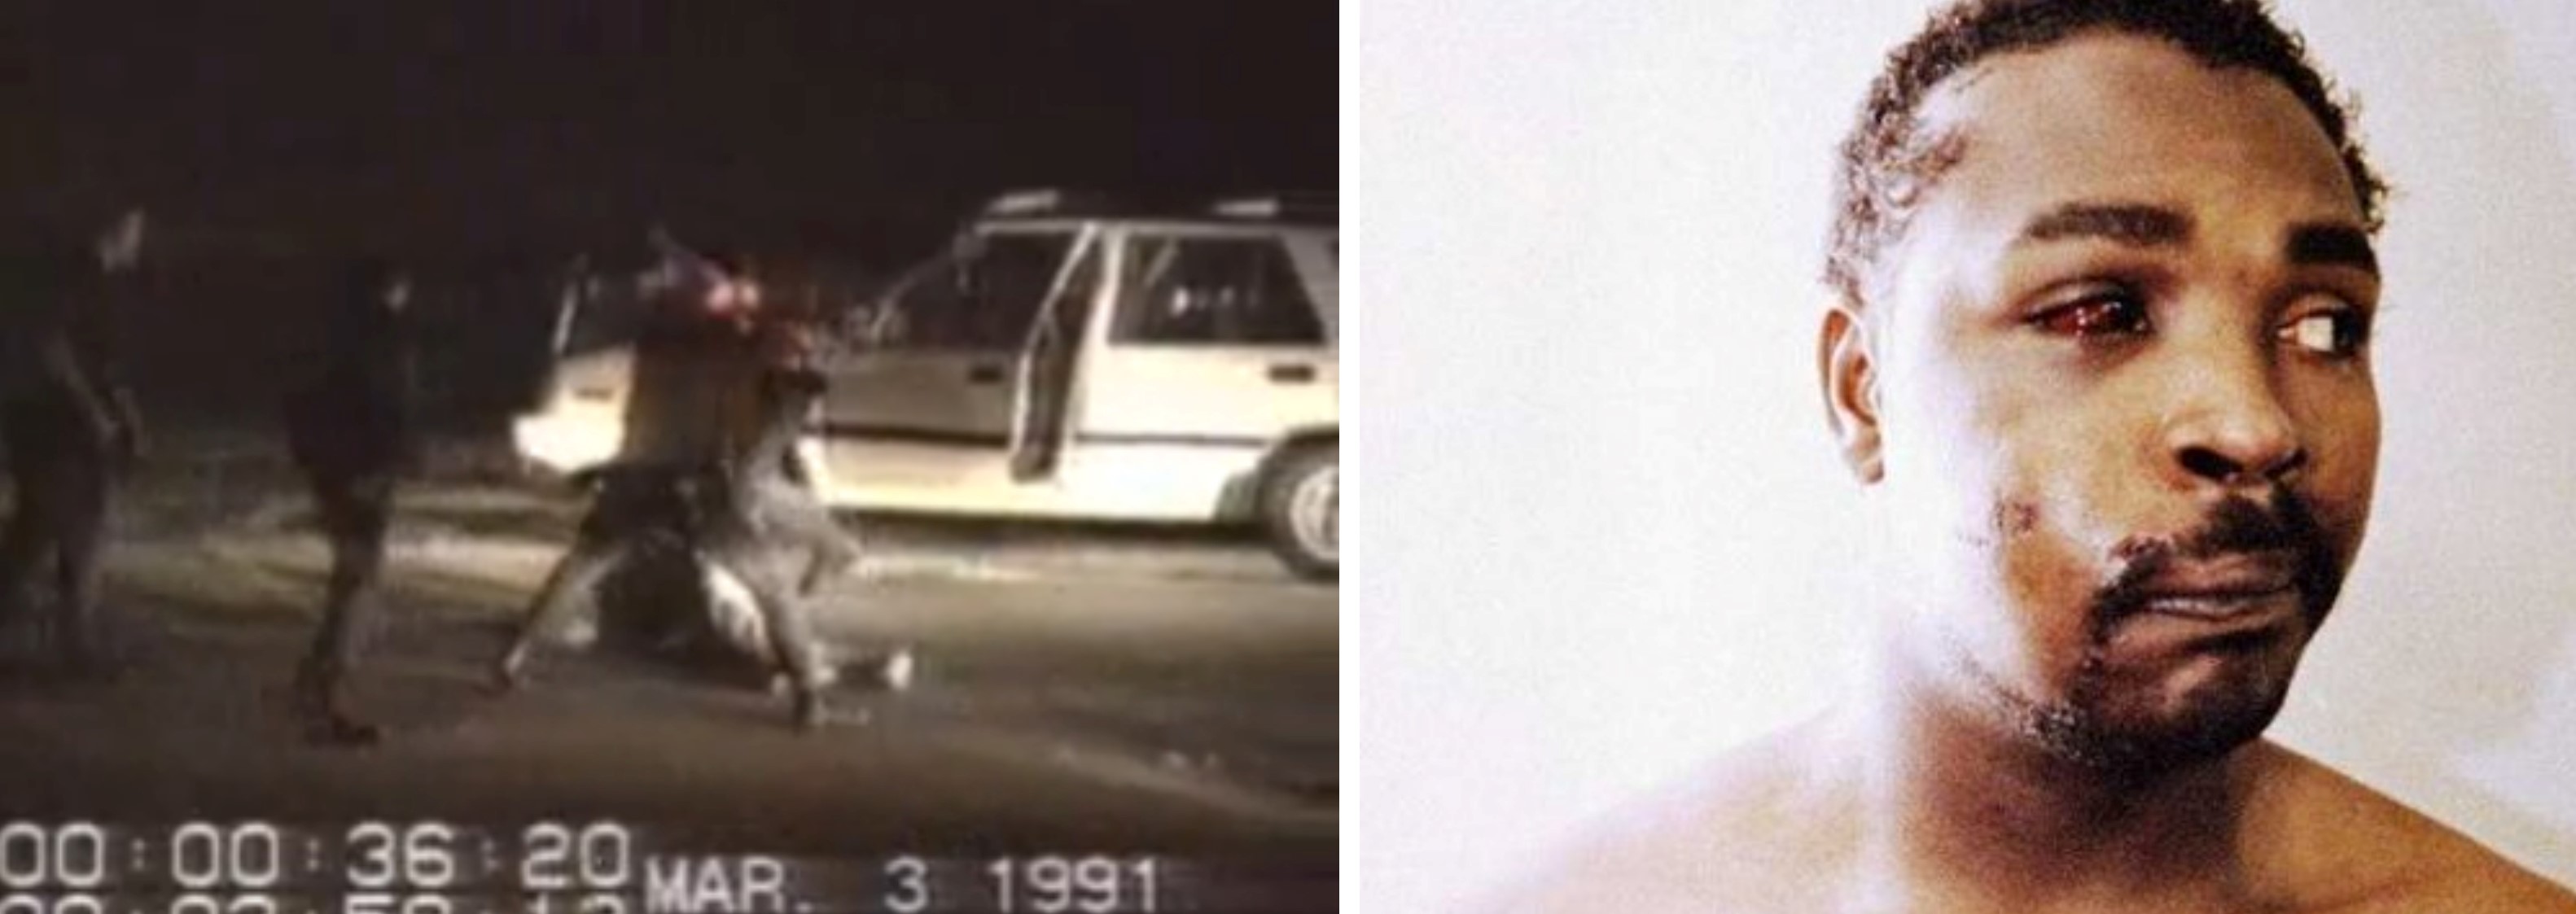 On the left, George Holliday's footage of Rodney King being beaten by police. On the right, King's injuries